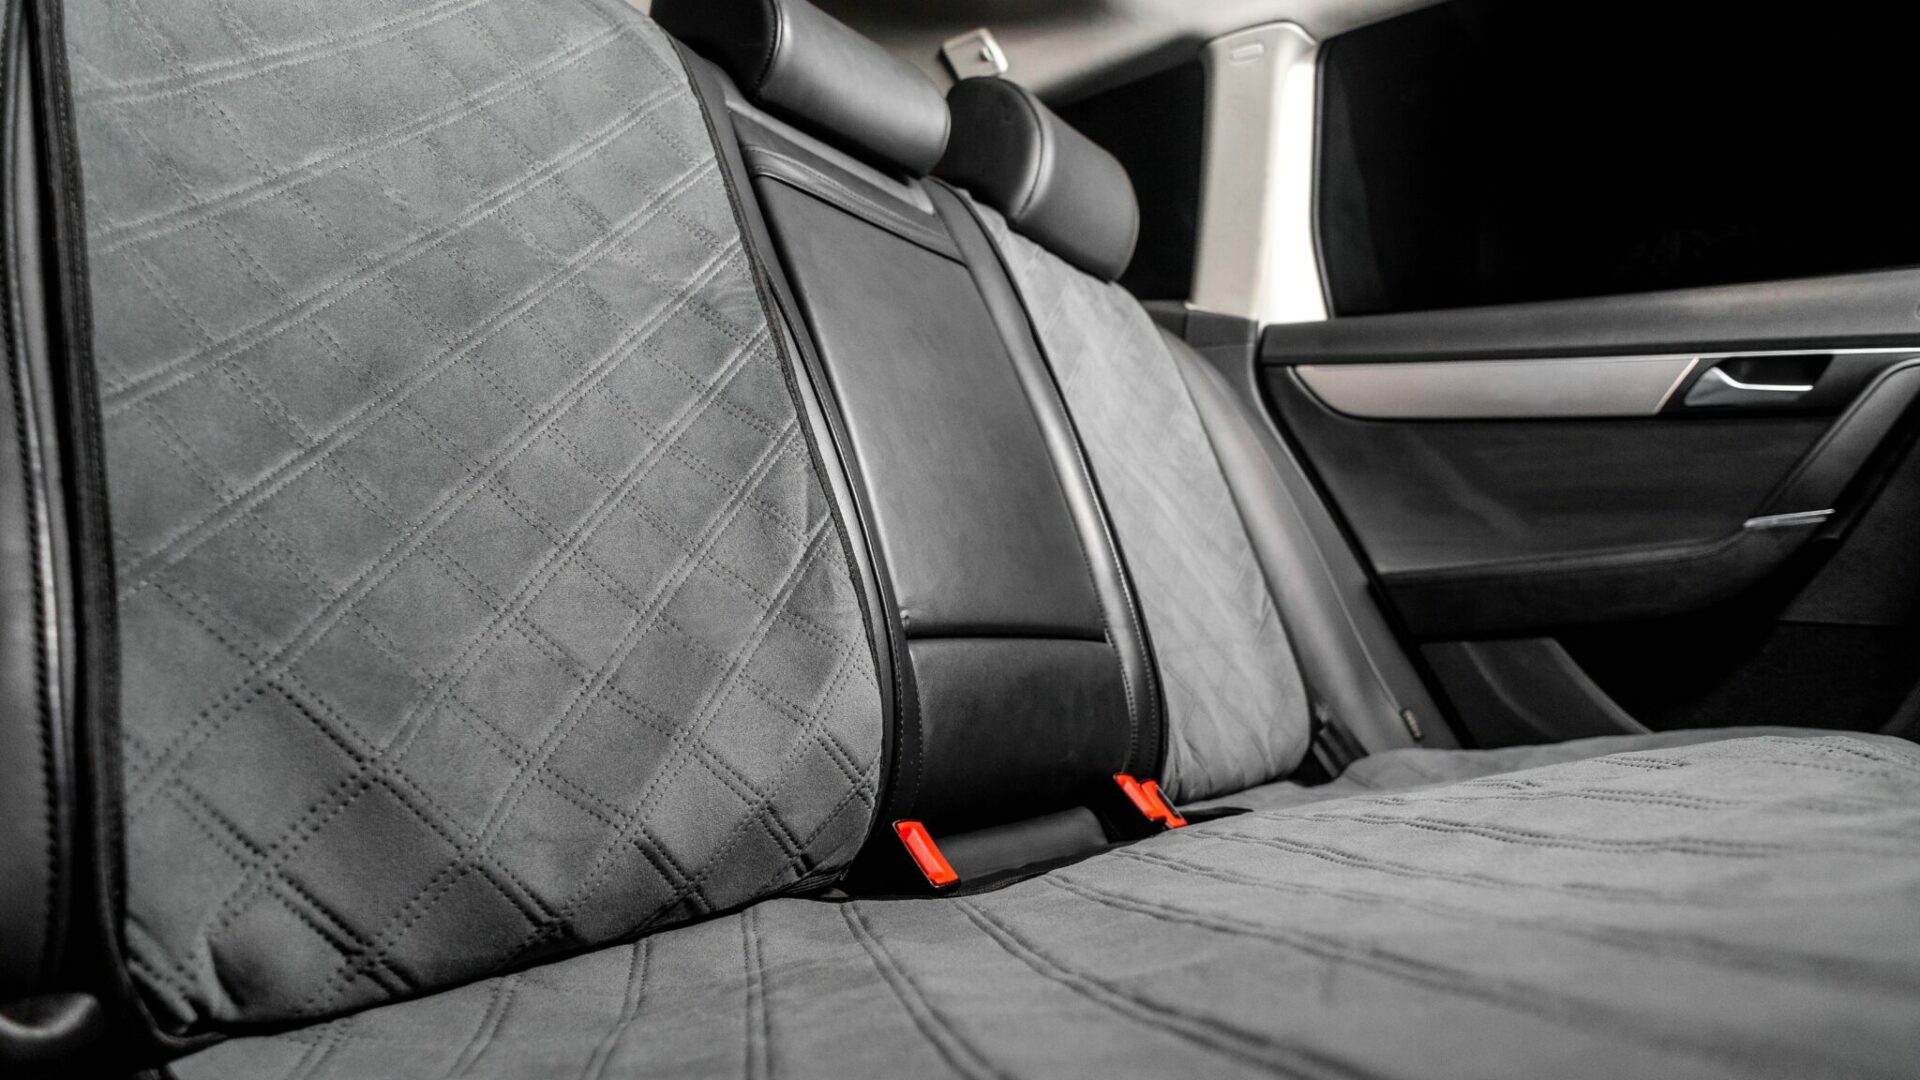 A gray car seat cover lines the back seat of a vehicle.